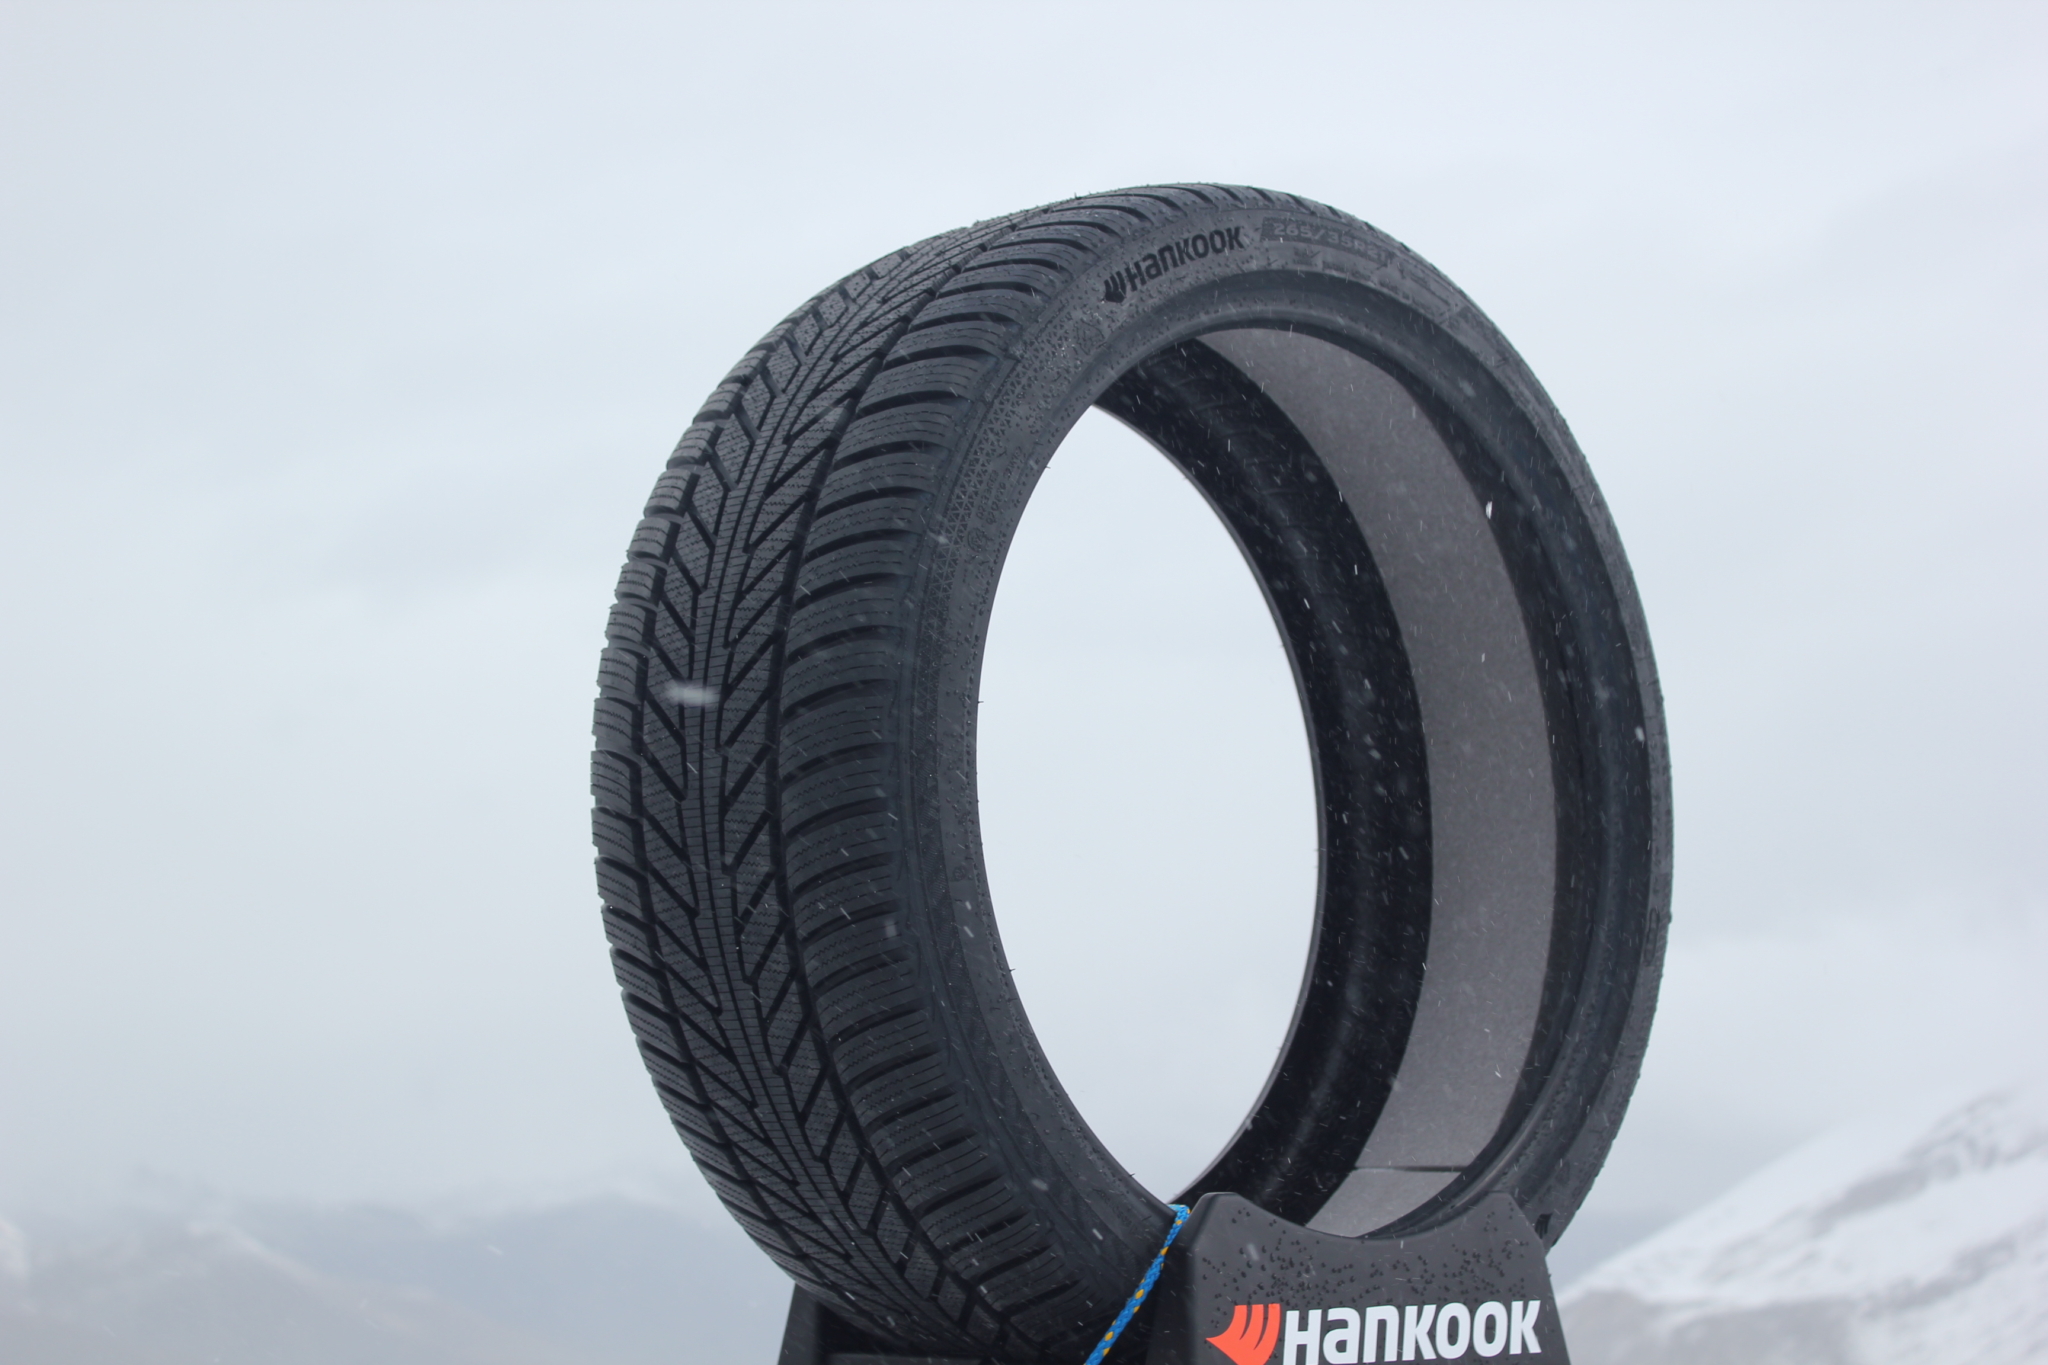 Hankook launches iON winter line within its electric vehicle tyre range